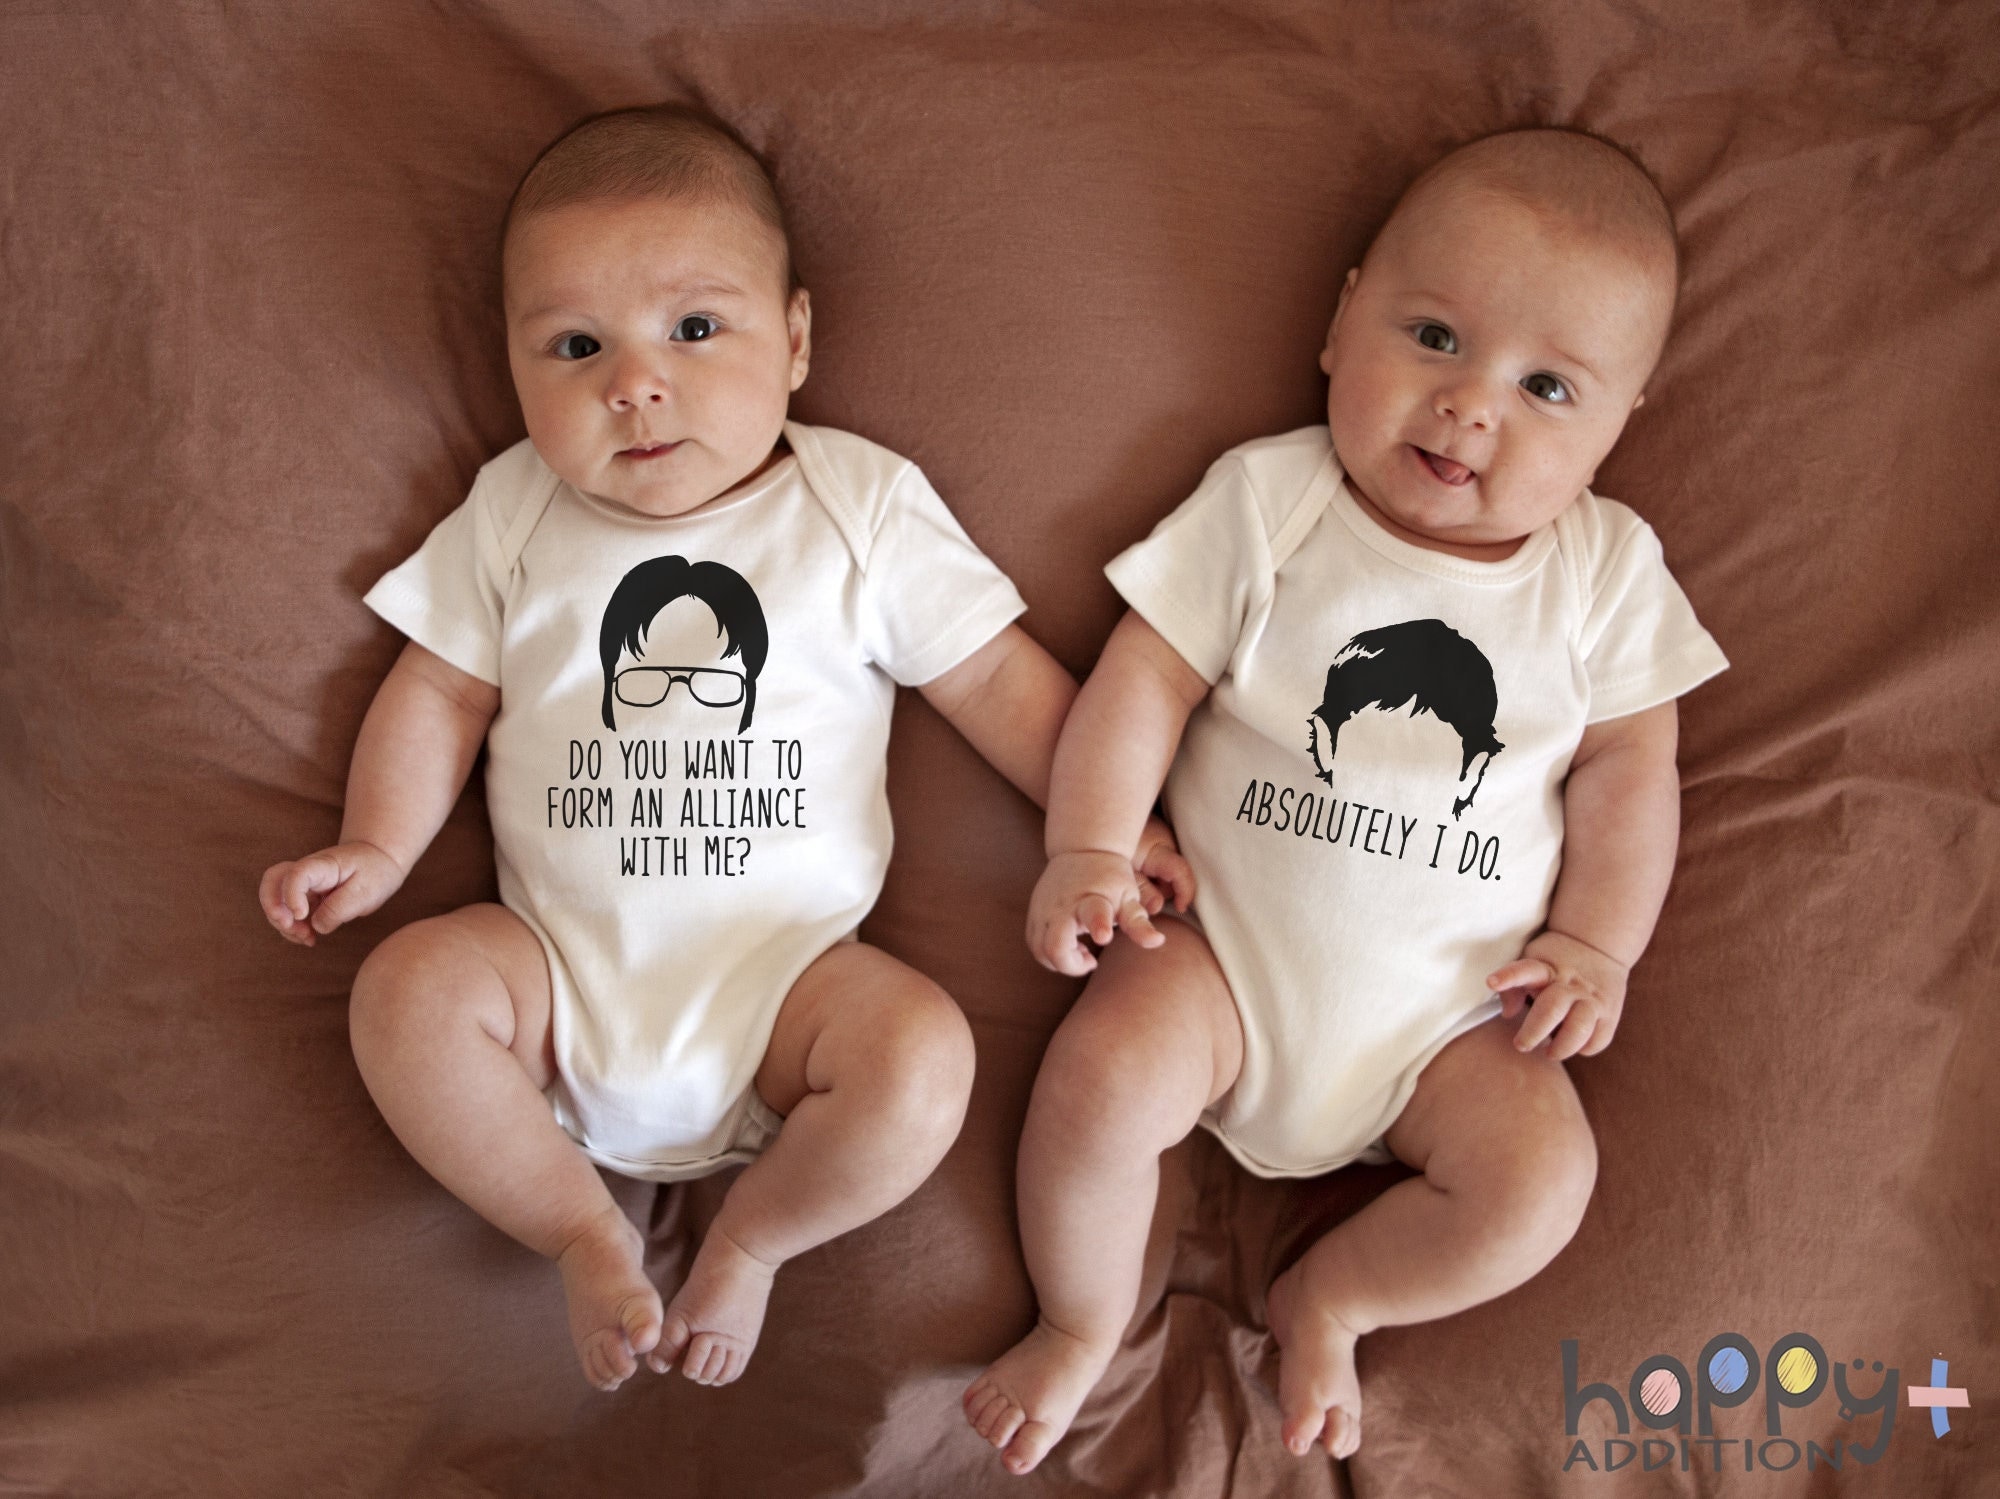 Funny Gift for Baby - Etsy